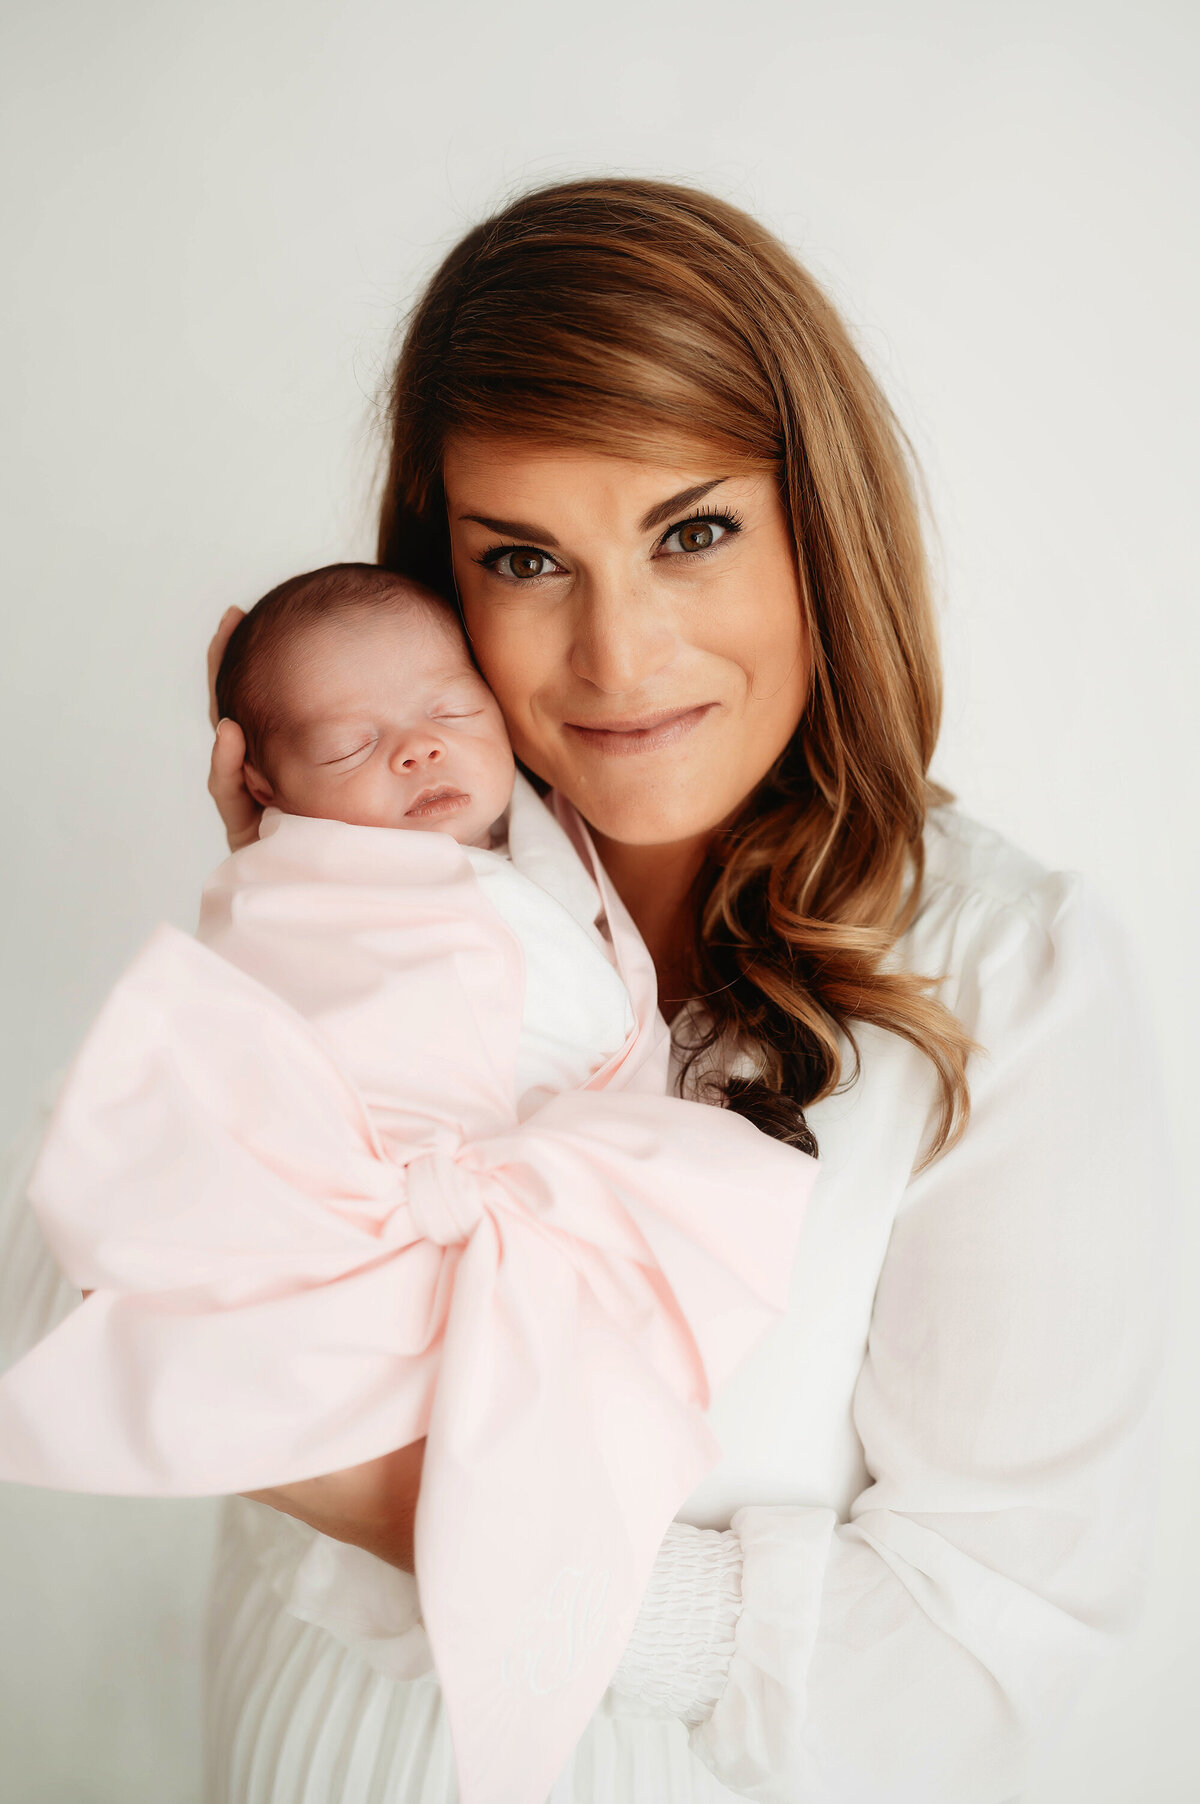 Mother poses with her infant daughter during Newborn Photos in Asheville, NC.